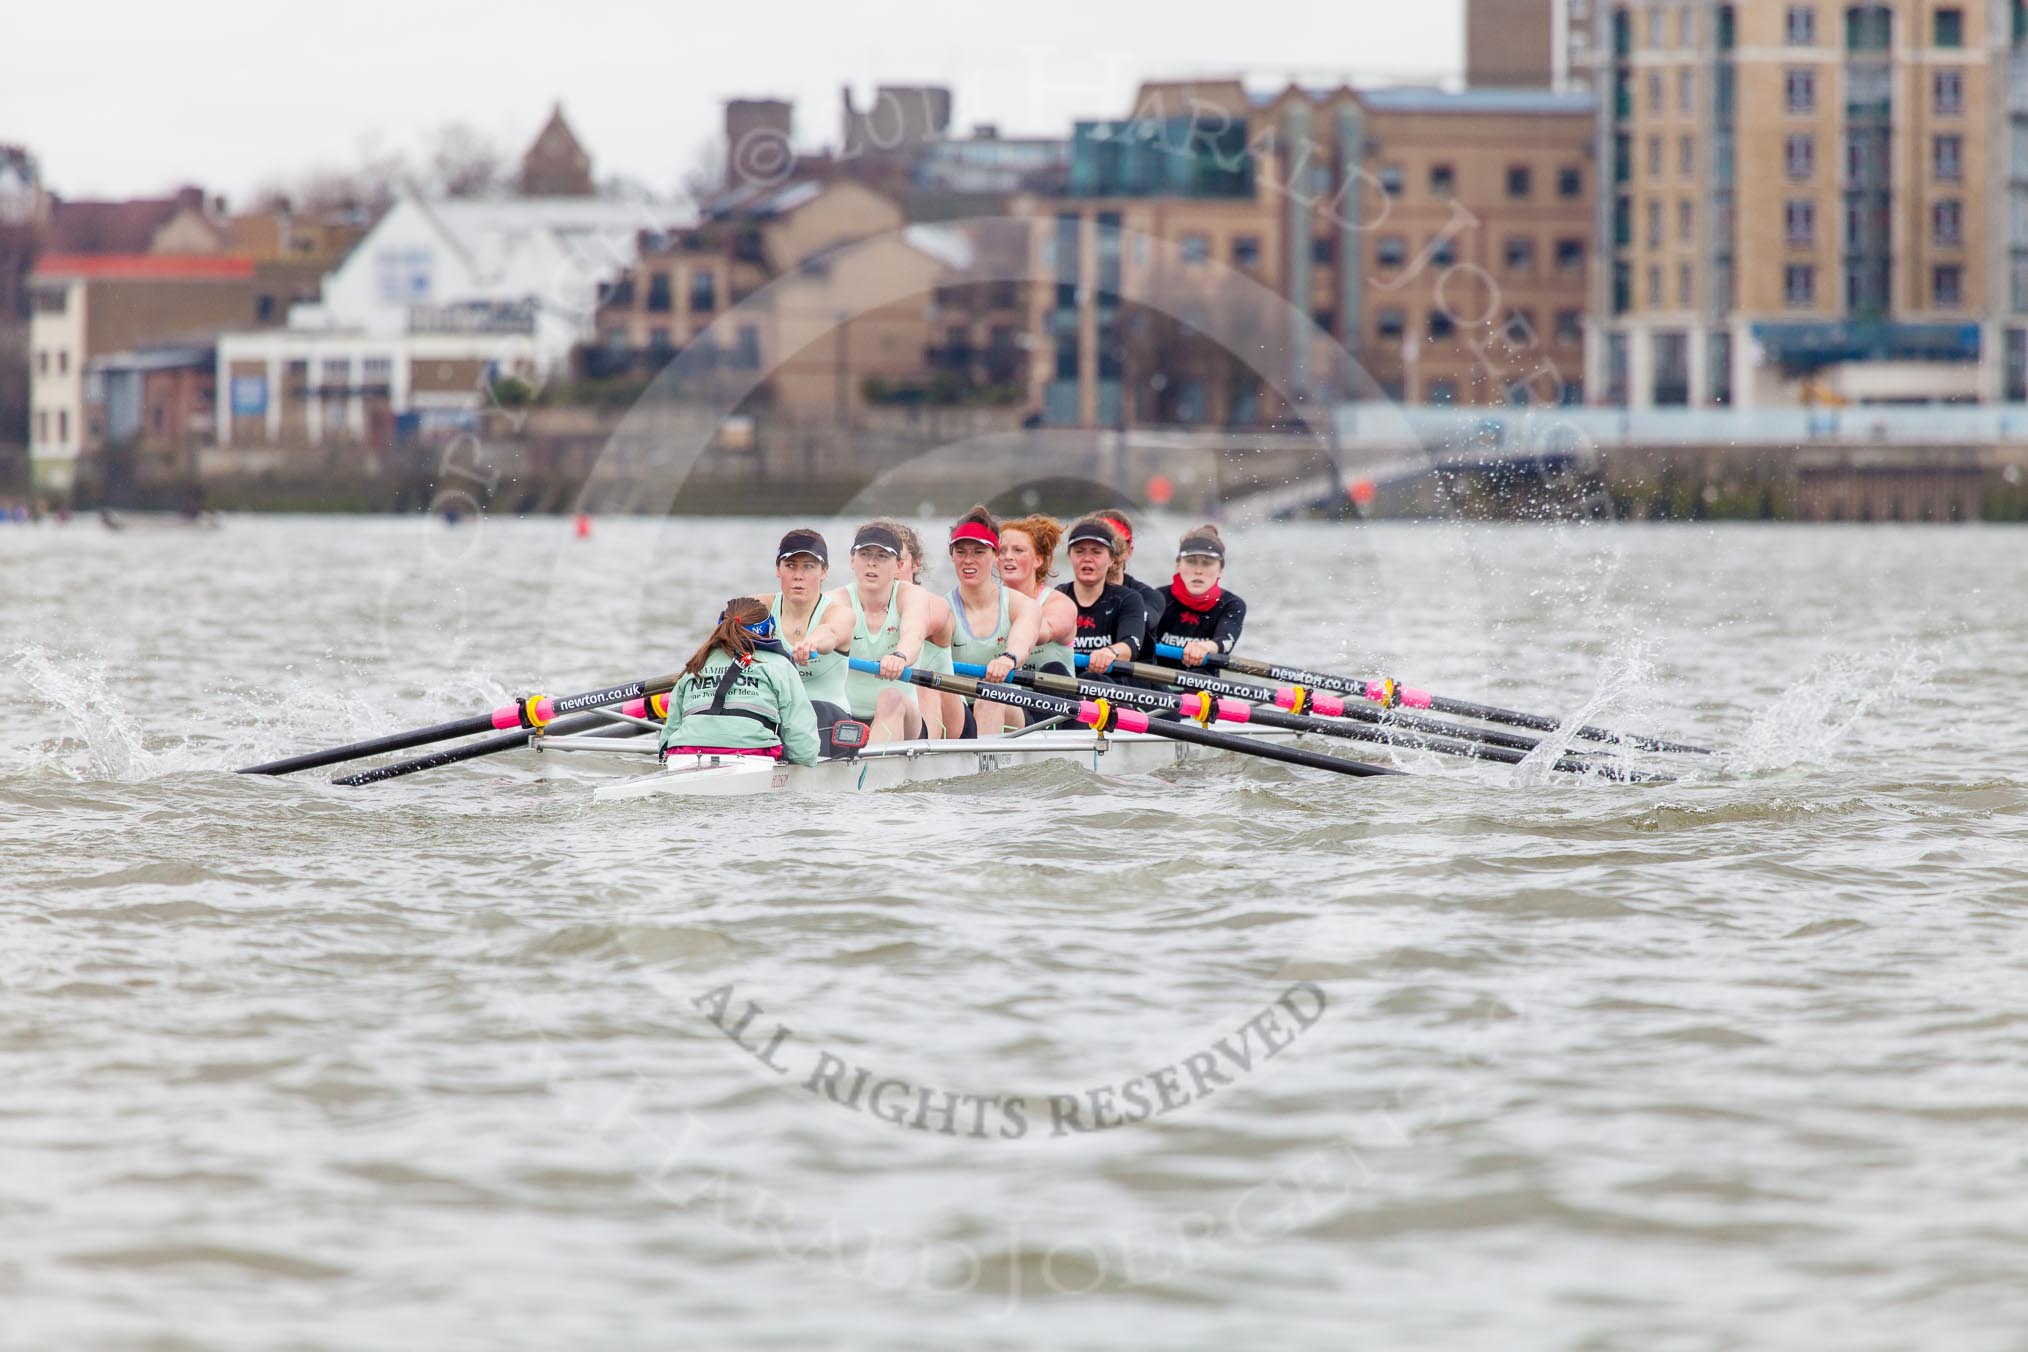 The Boat Race season 2014 - fixture CUWBC vs Thames RC.




on 02 March 2014 at 13:14, image #92